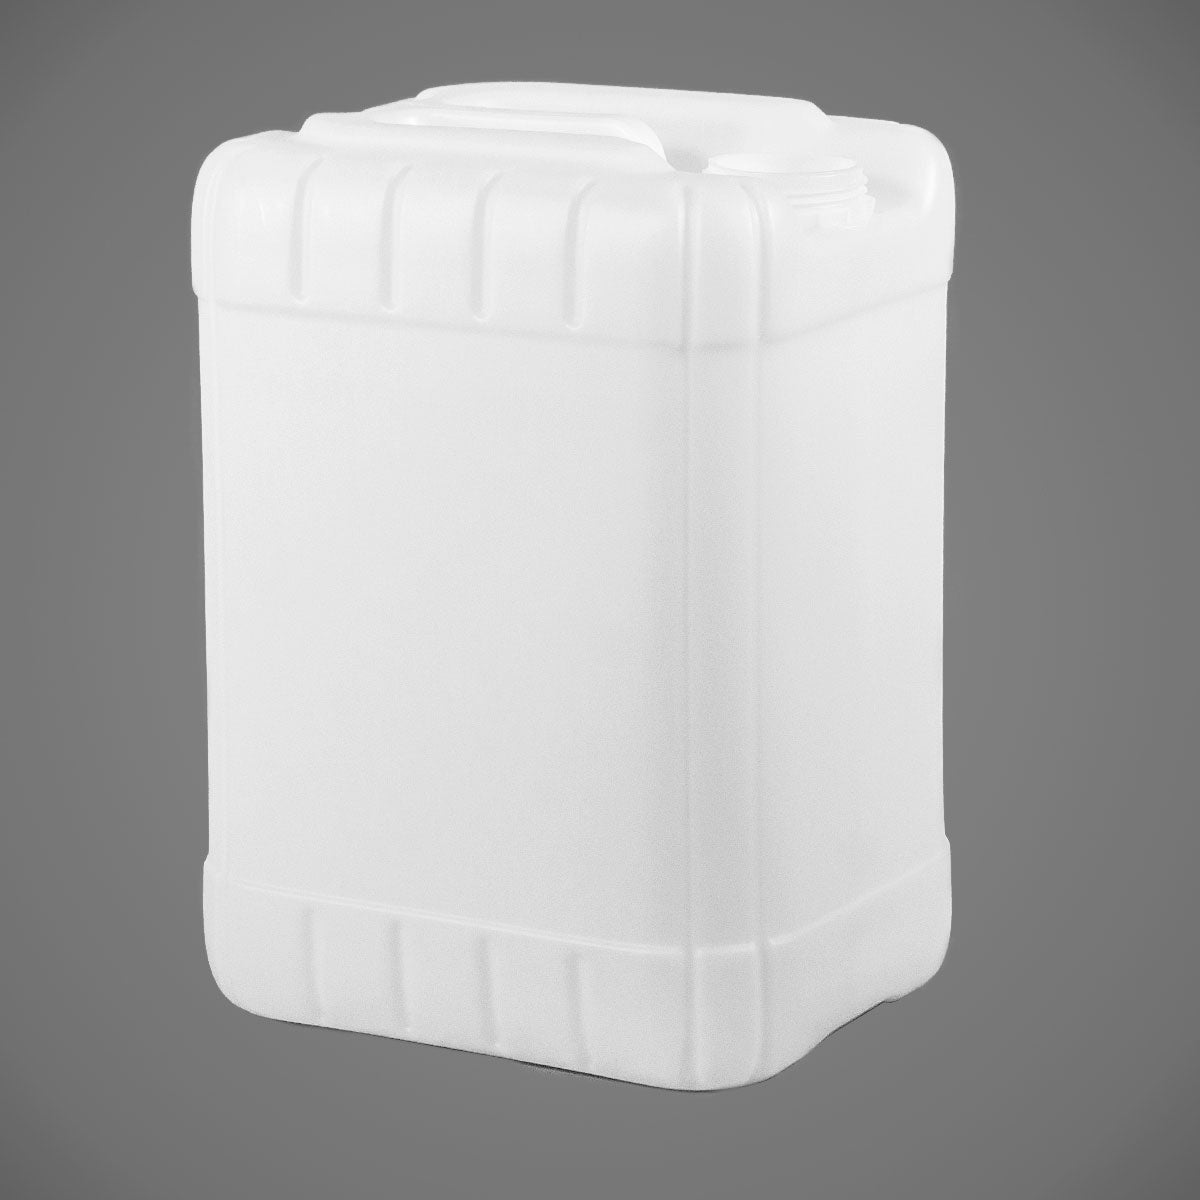 5 Gallon HDPE Tight Head Container Natural 1,100 gram Weight Reike 70mm TE Neck w/ 21mm Vent - 120 per pallet - Rock Bottom Bottles / Packaging Company LLC